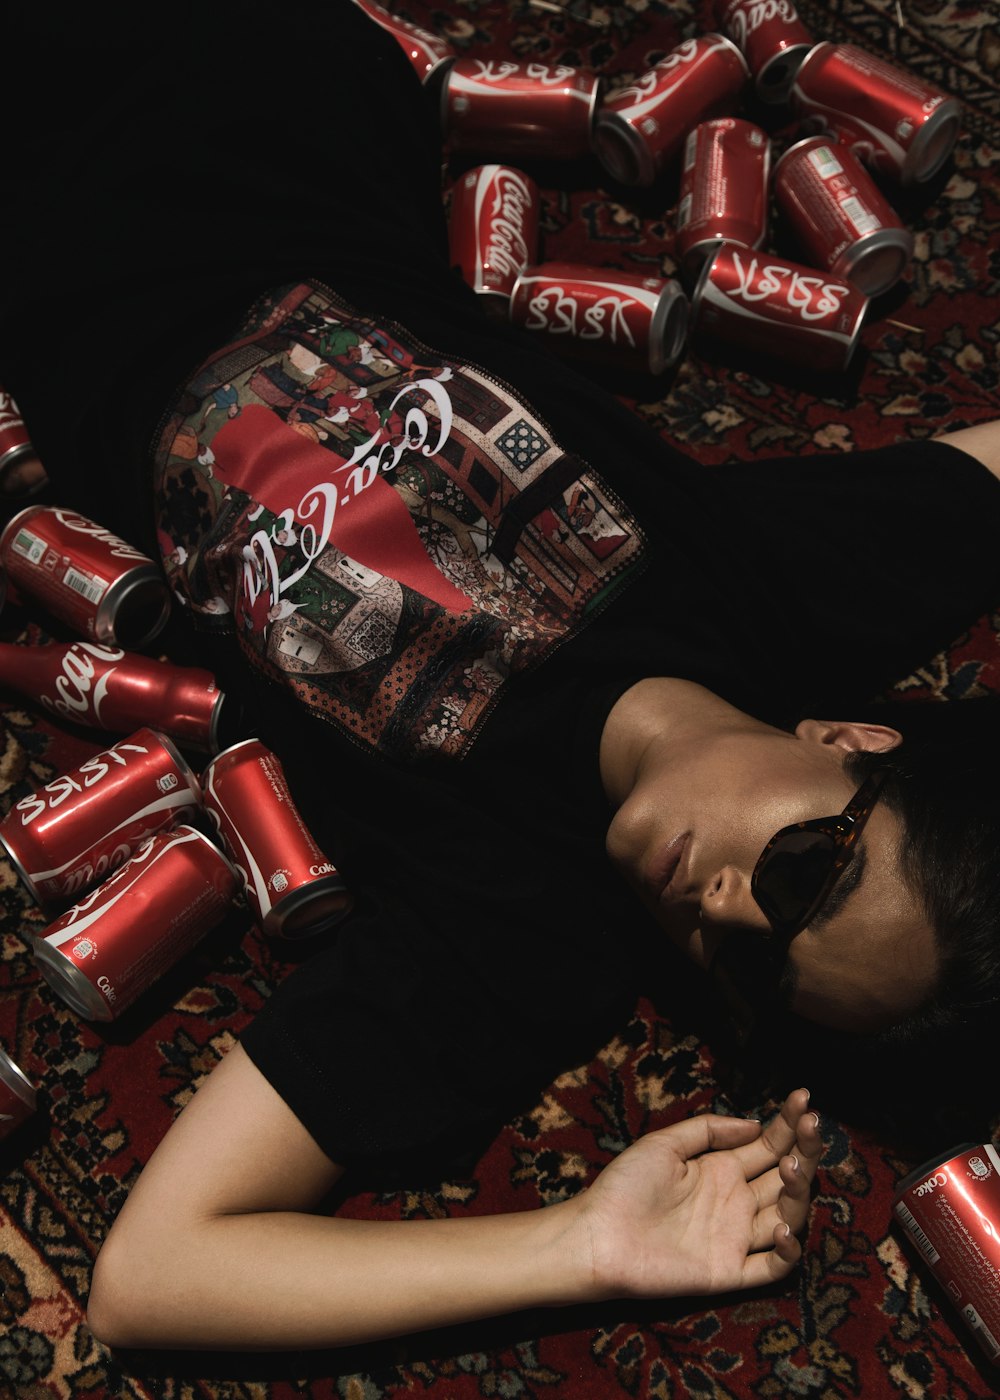 person lying on floor near Coca-Cola cans